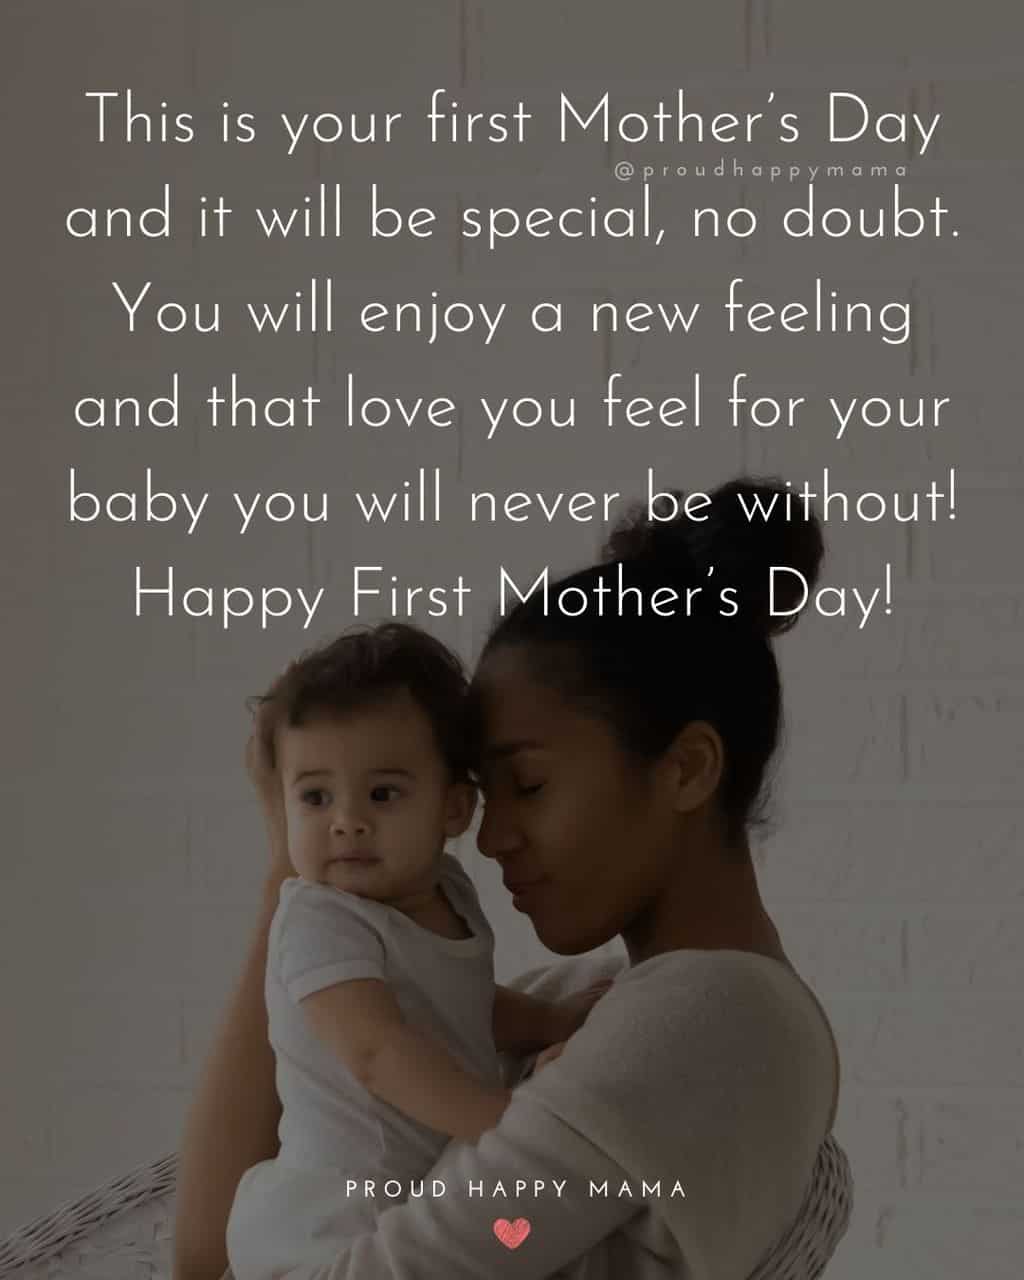 First Mothers Day Quotes - This is your first Mother’s Day and it will be special, no doubt. You will enjoy a new feeling and that love you feel 